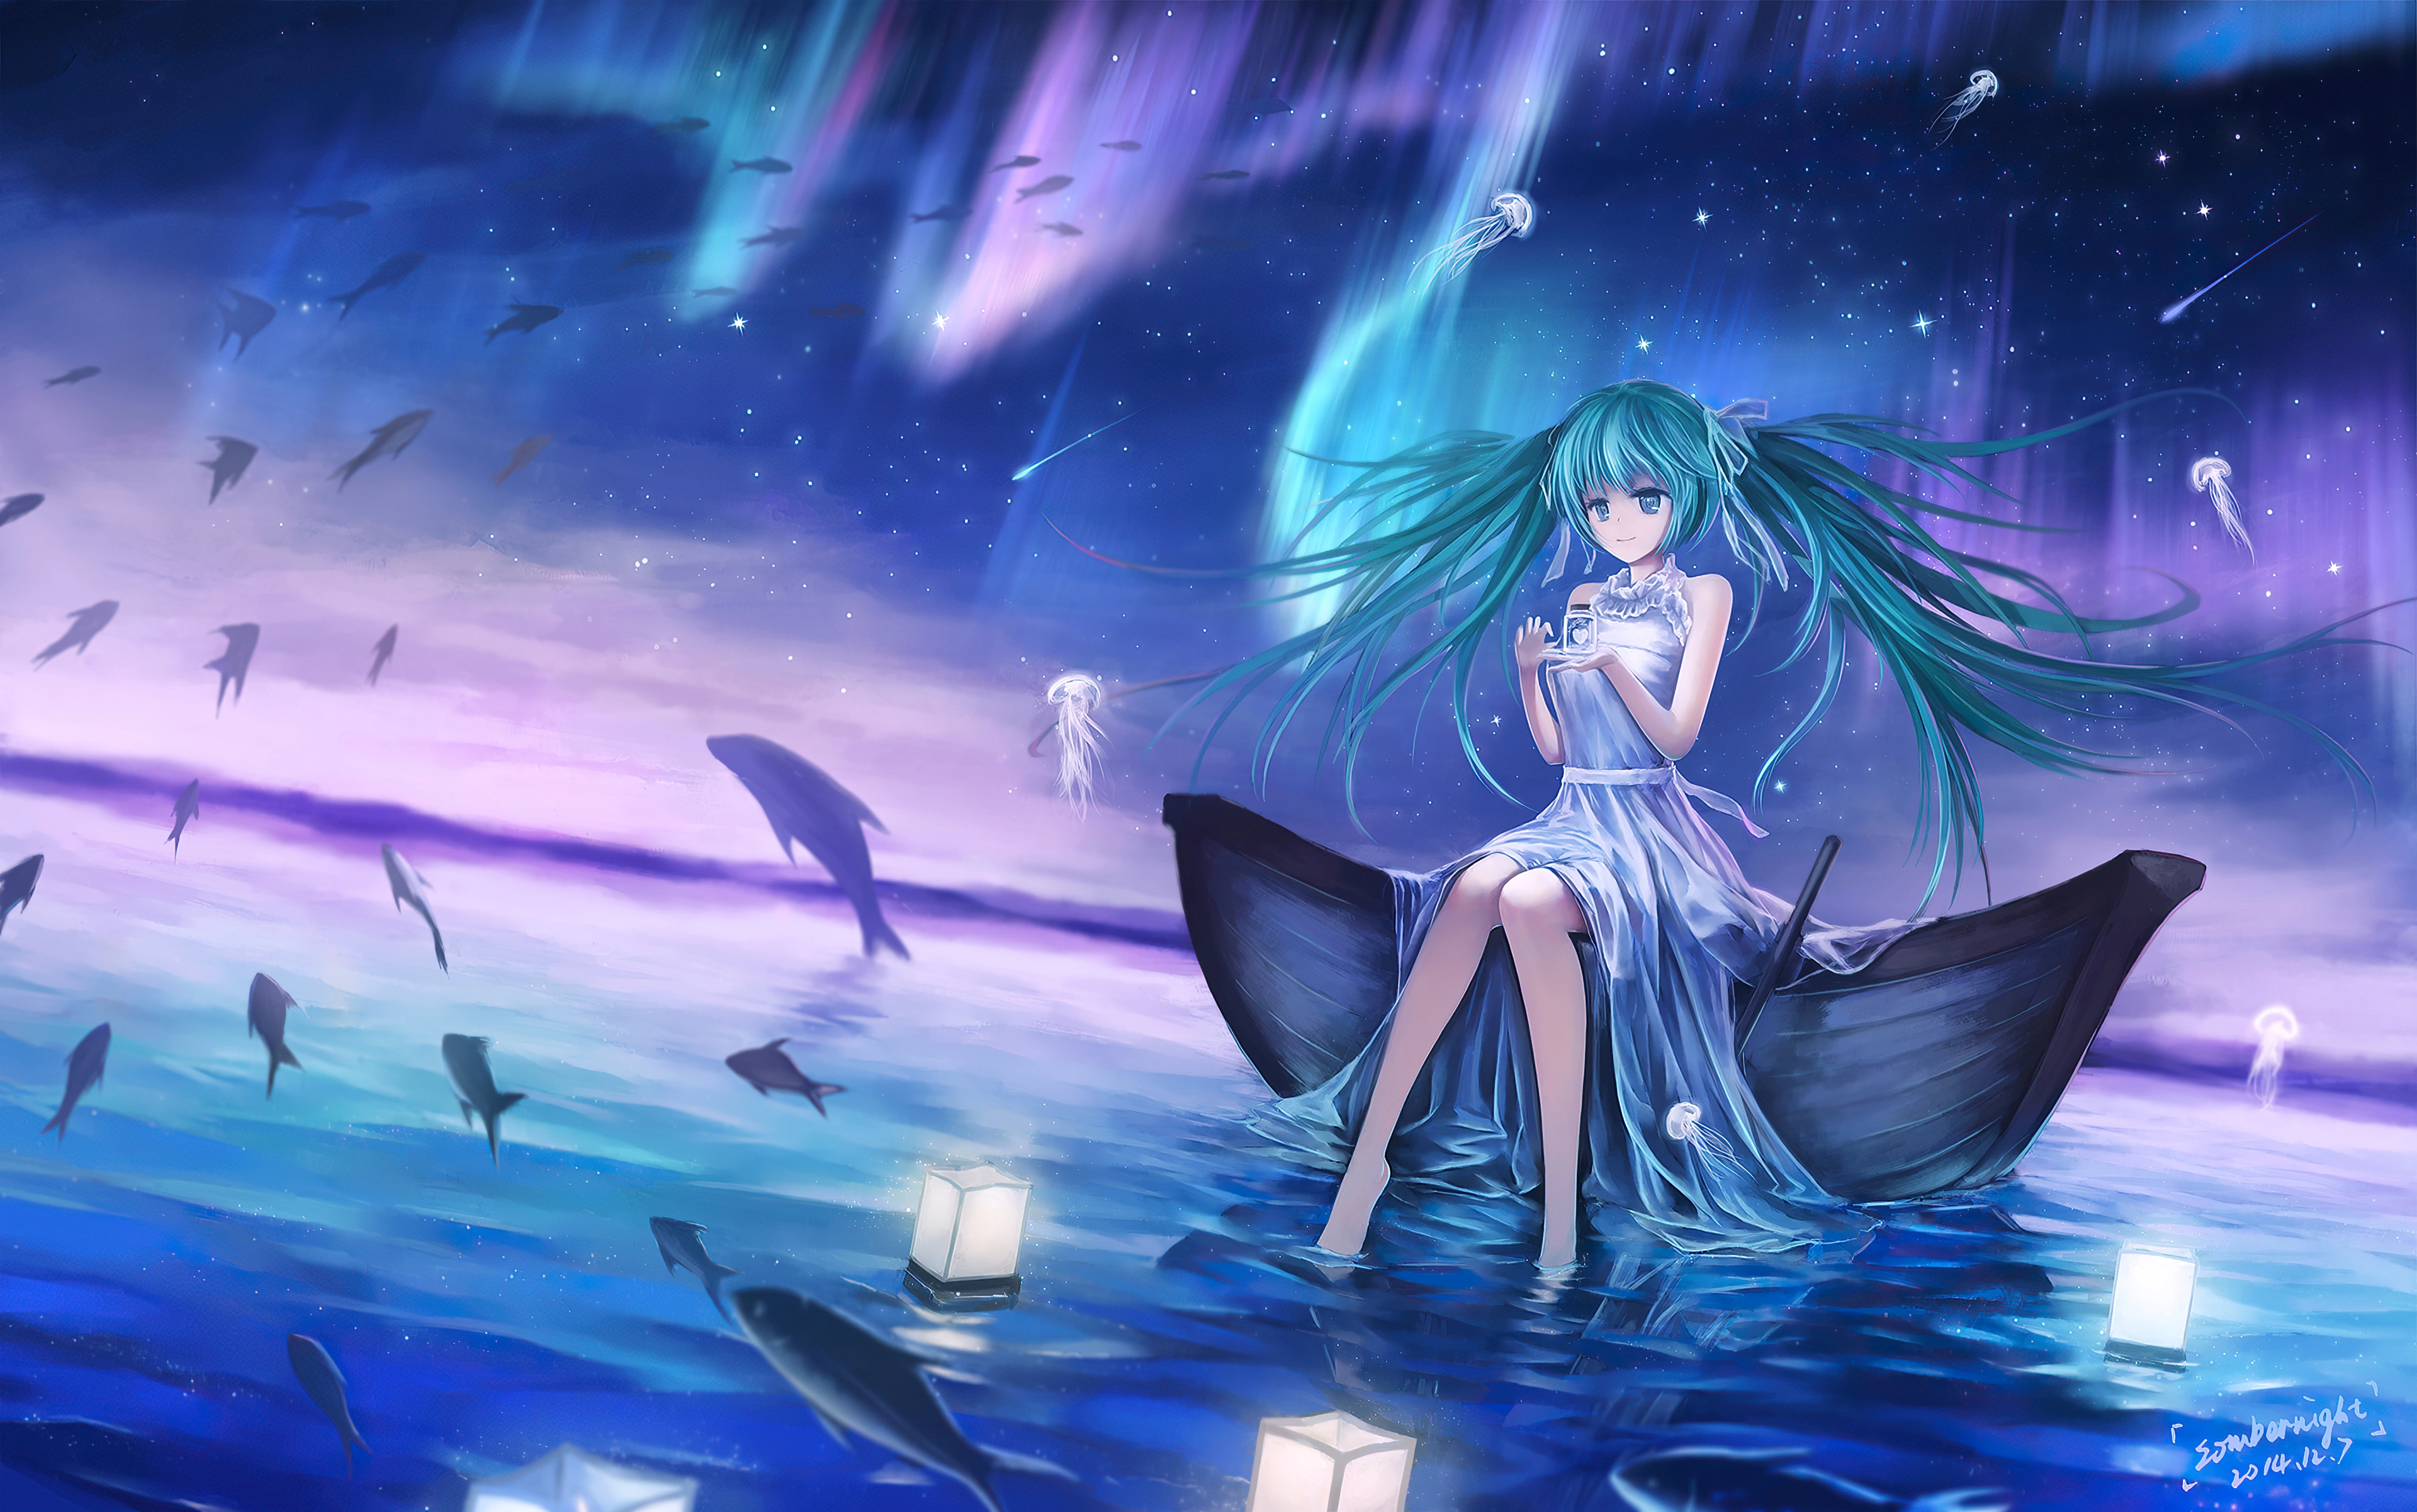 Anime Vocaloid HD Wallpaper by 蝶夜